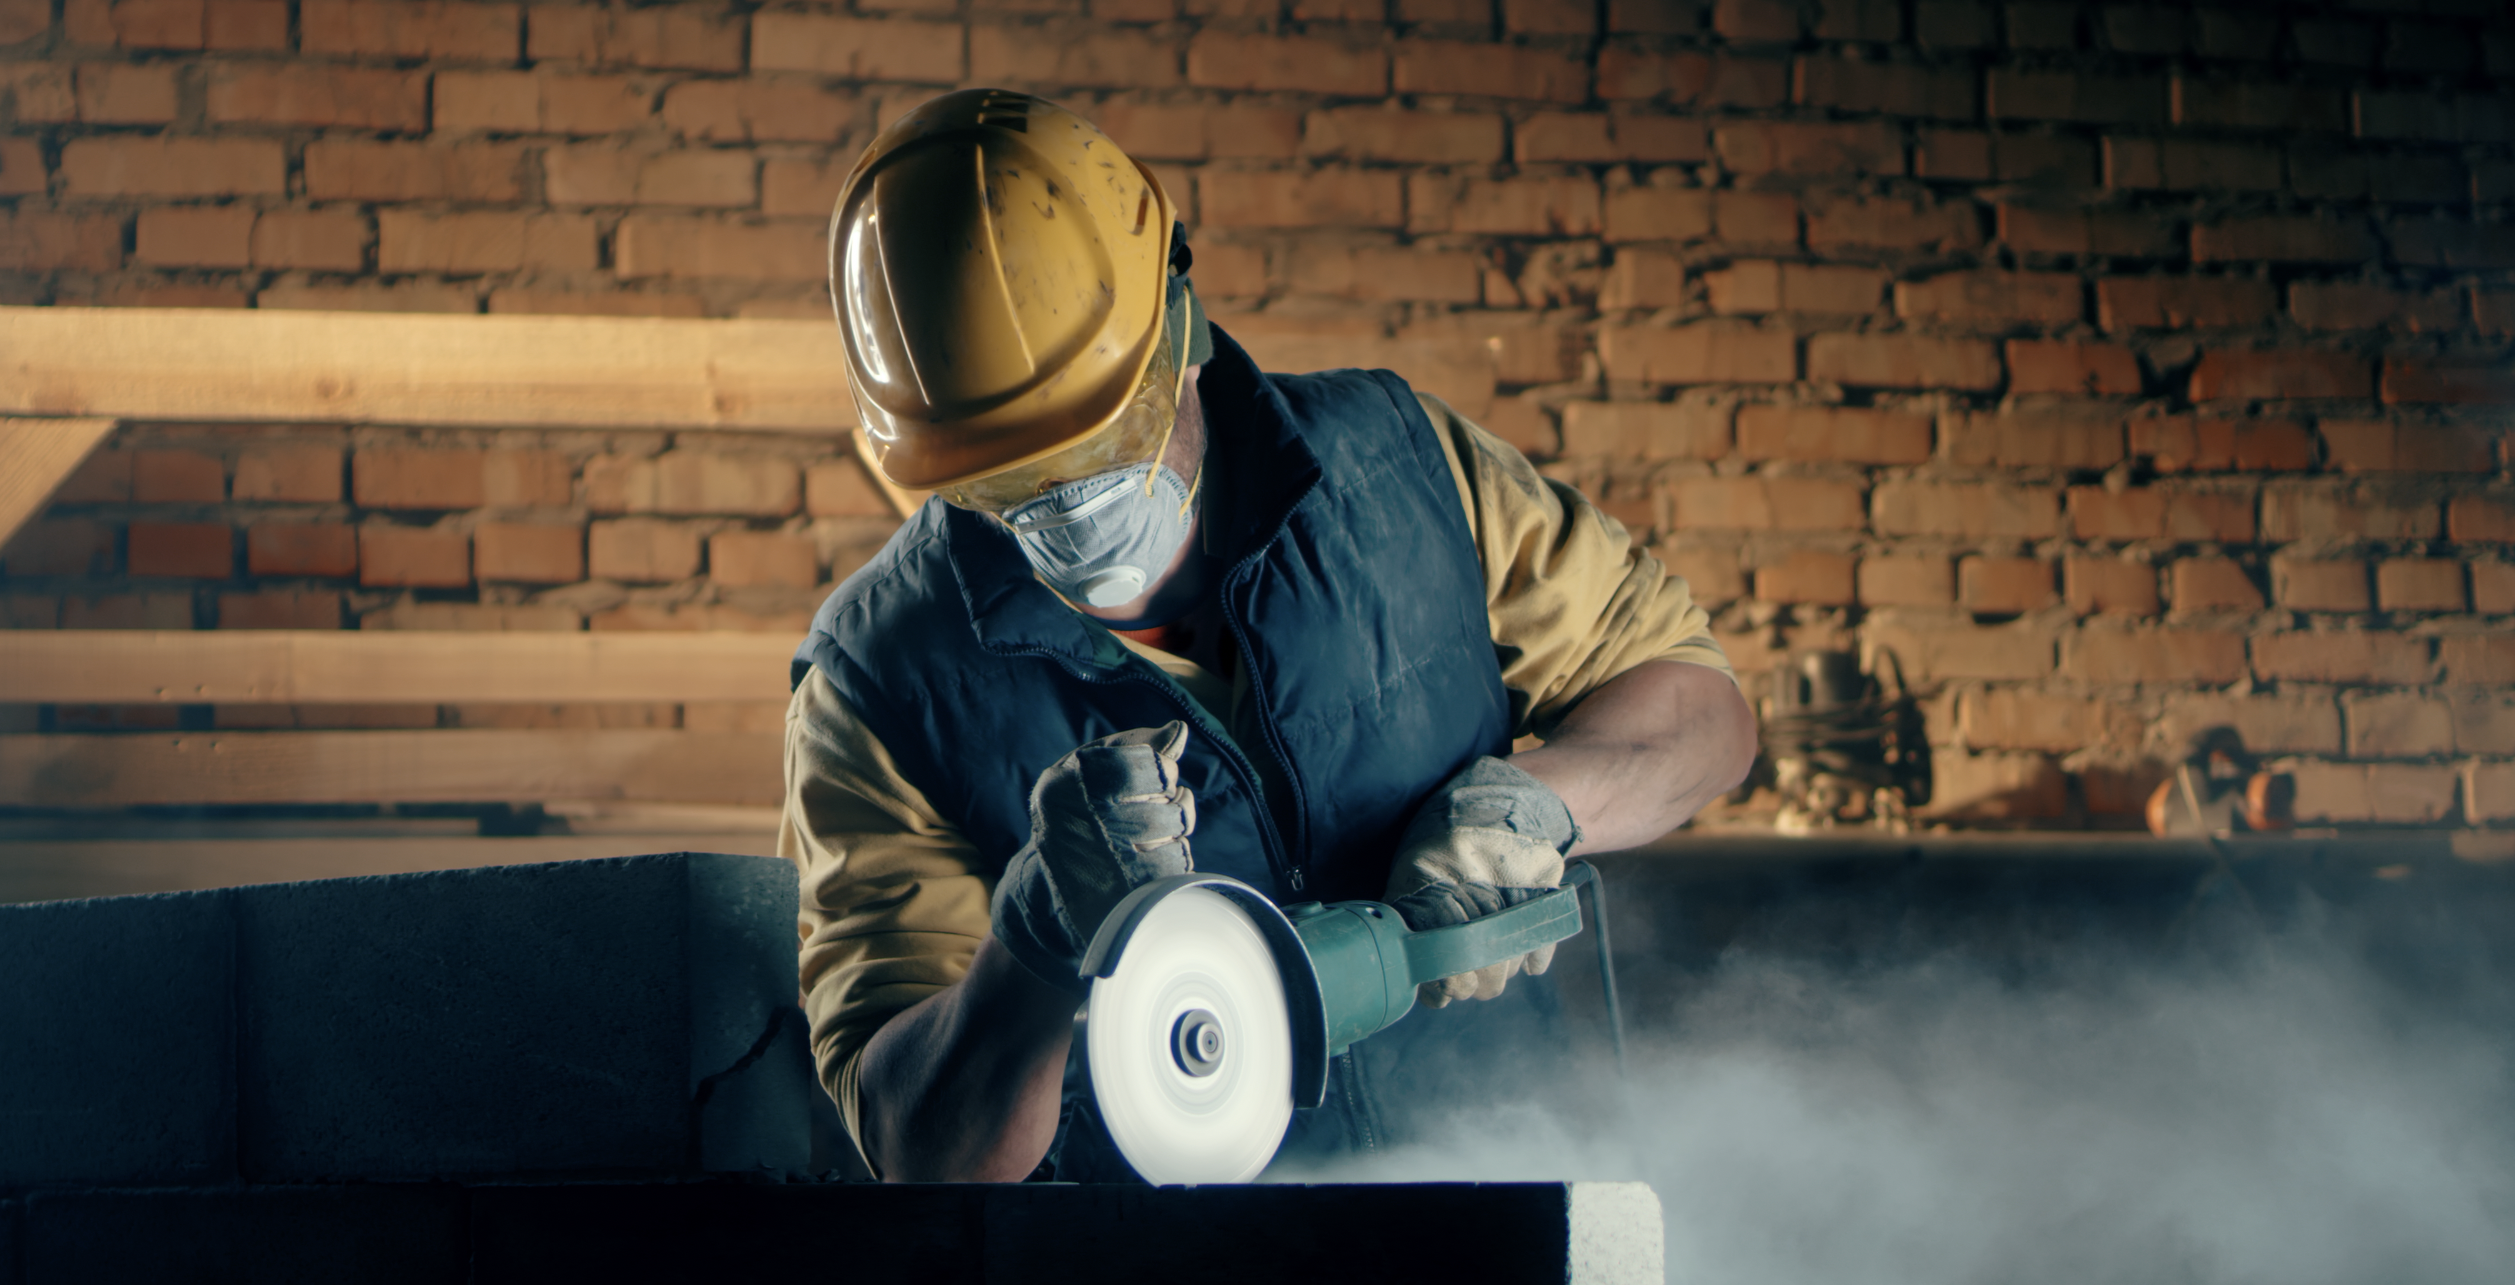 Construction worker with a mask on cutting into metal with an angle grinder for silicosis awareness